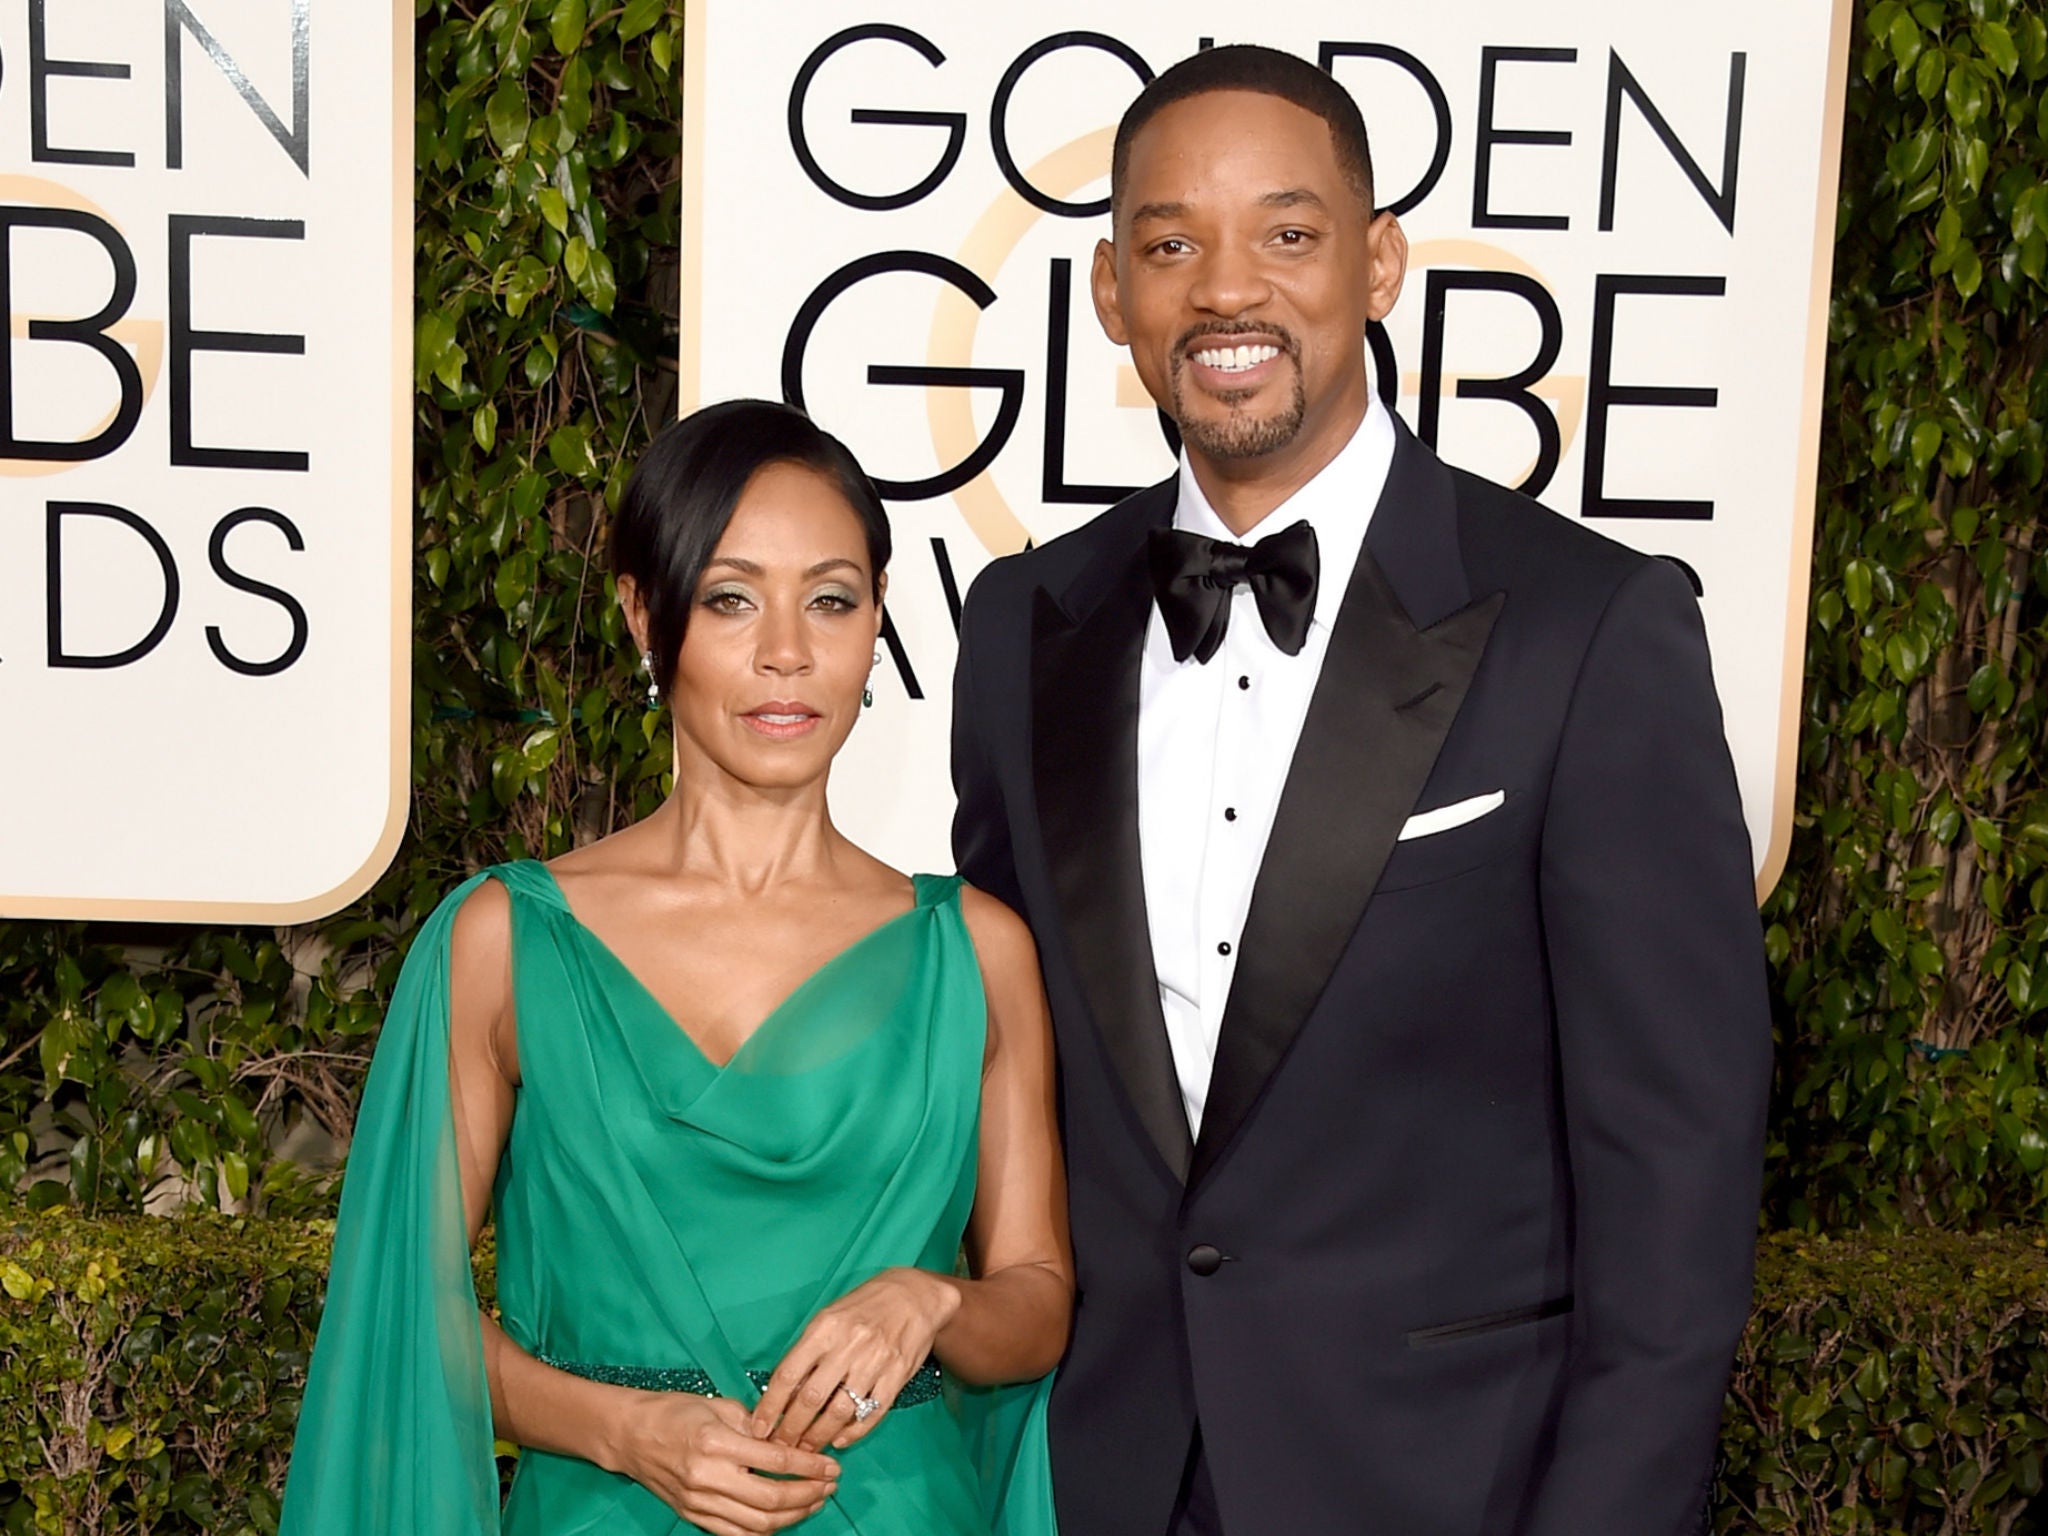 Pinkett Smith and Smith at the recent Golden Globes